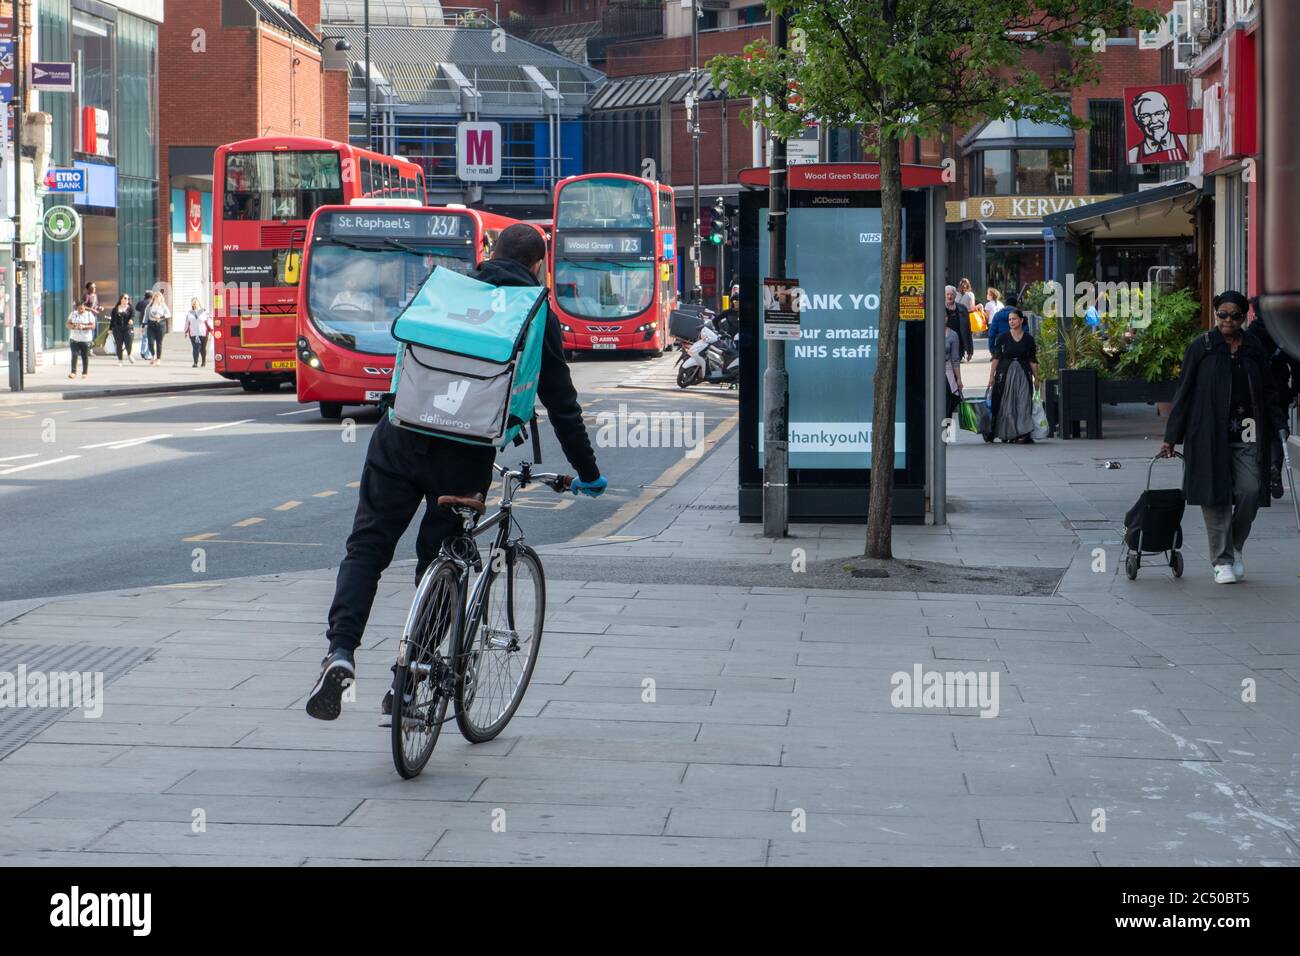 A cyclist working for Deliveroo home delivery service in a London high street. Stock Photo